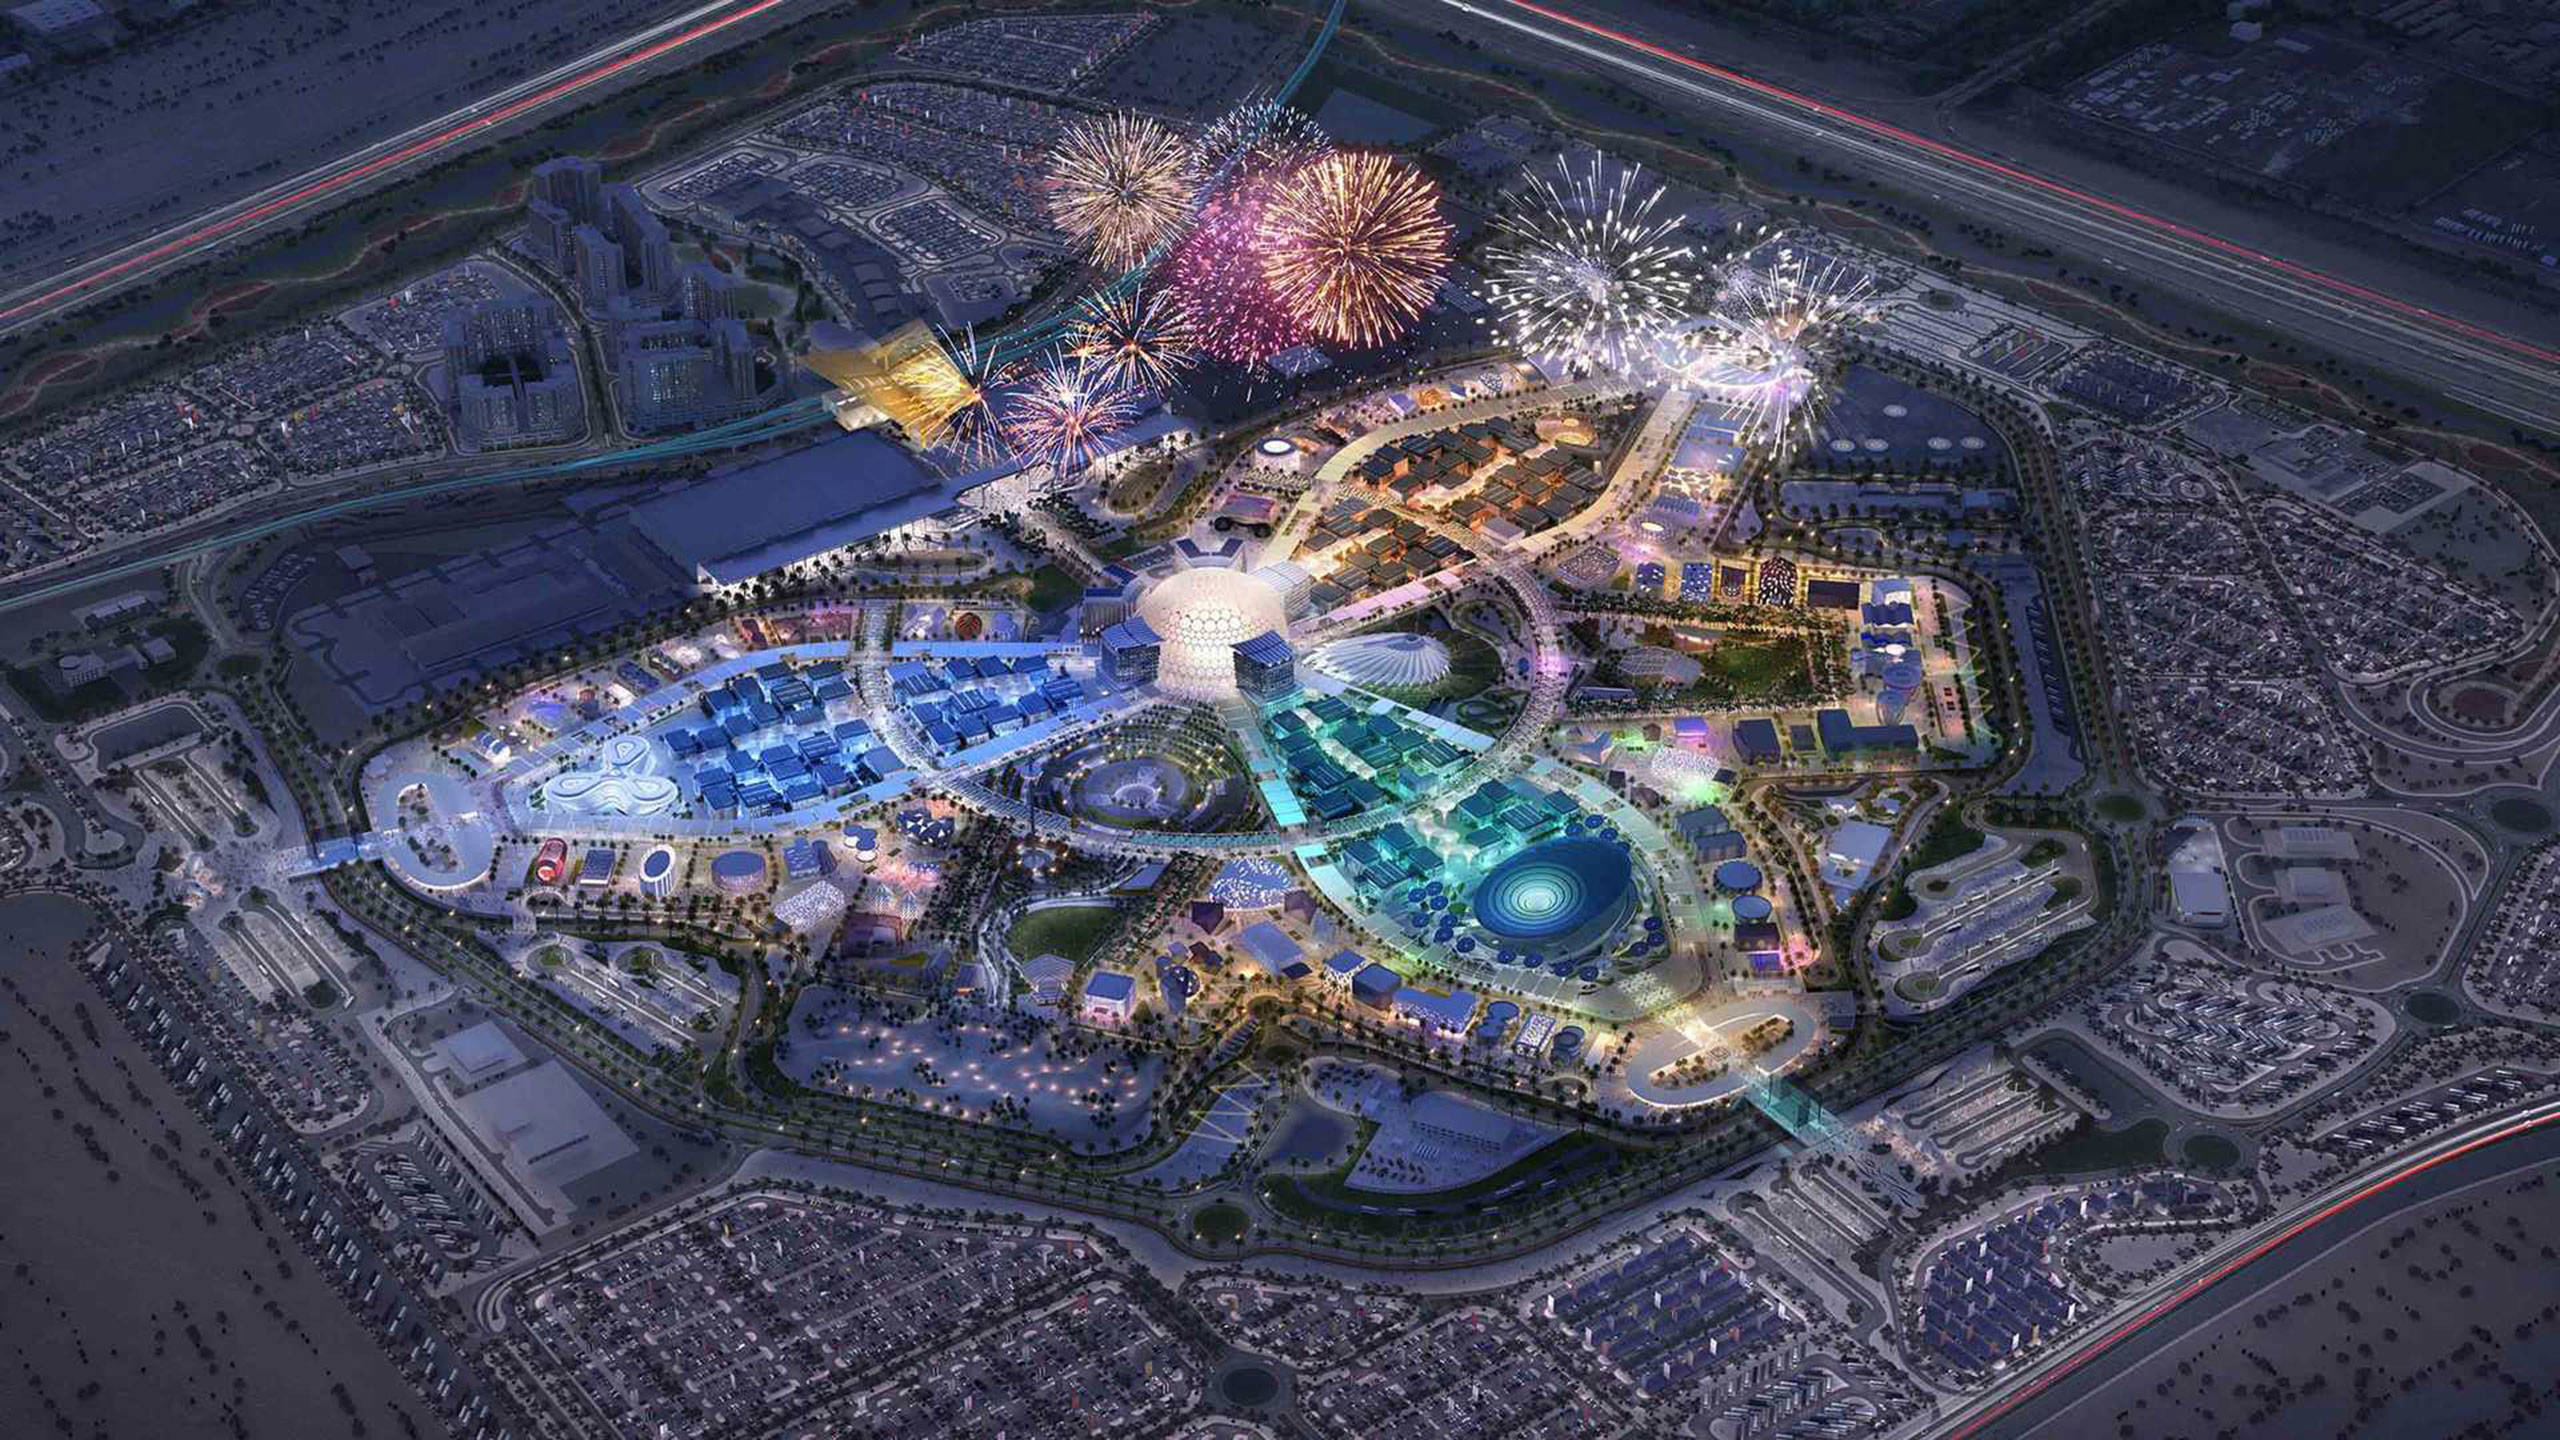 World Expo 2020 aerial view of the central dome